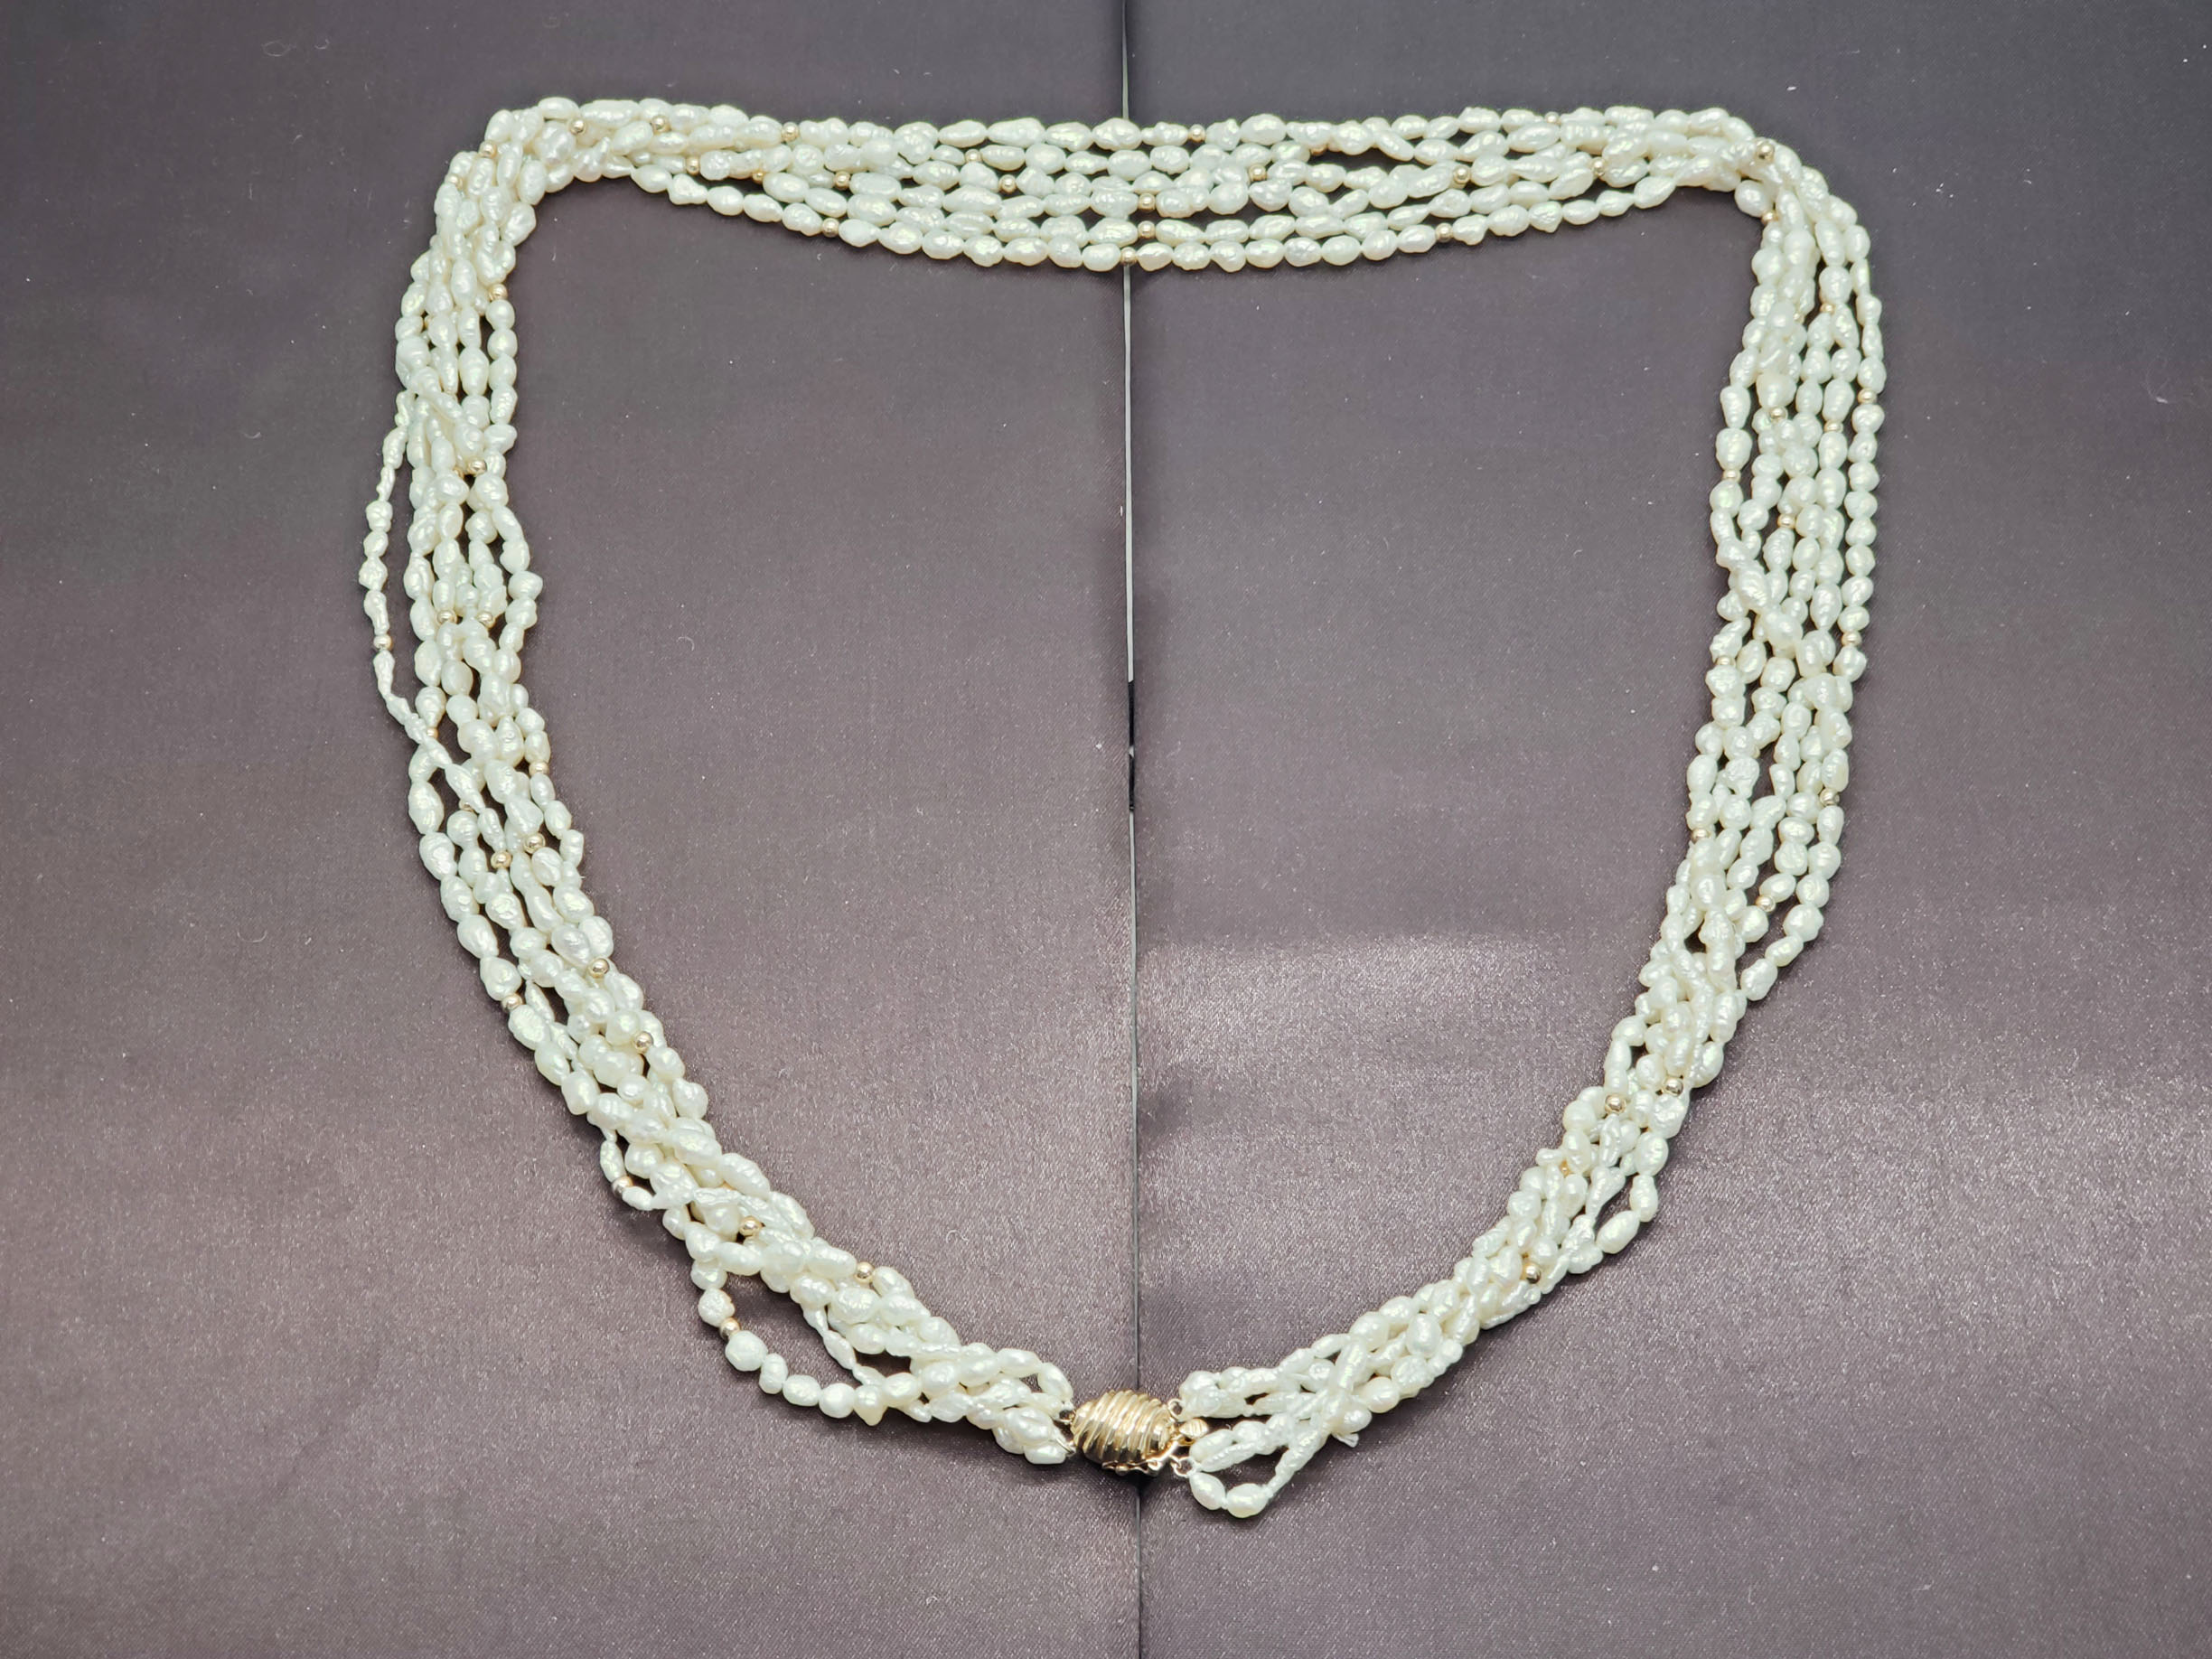 Angel Skin Multi-Strand Bead & Carved Tube Coral Bead Necklace 14k Gold 36″  - Jewelry & Coin Mart, Schaumburg, IL